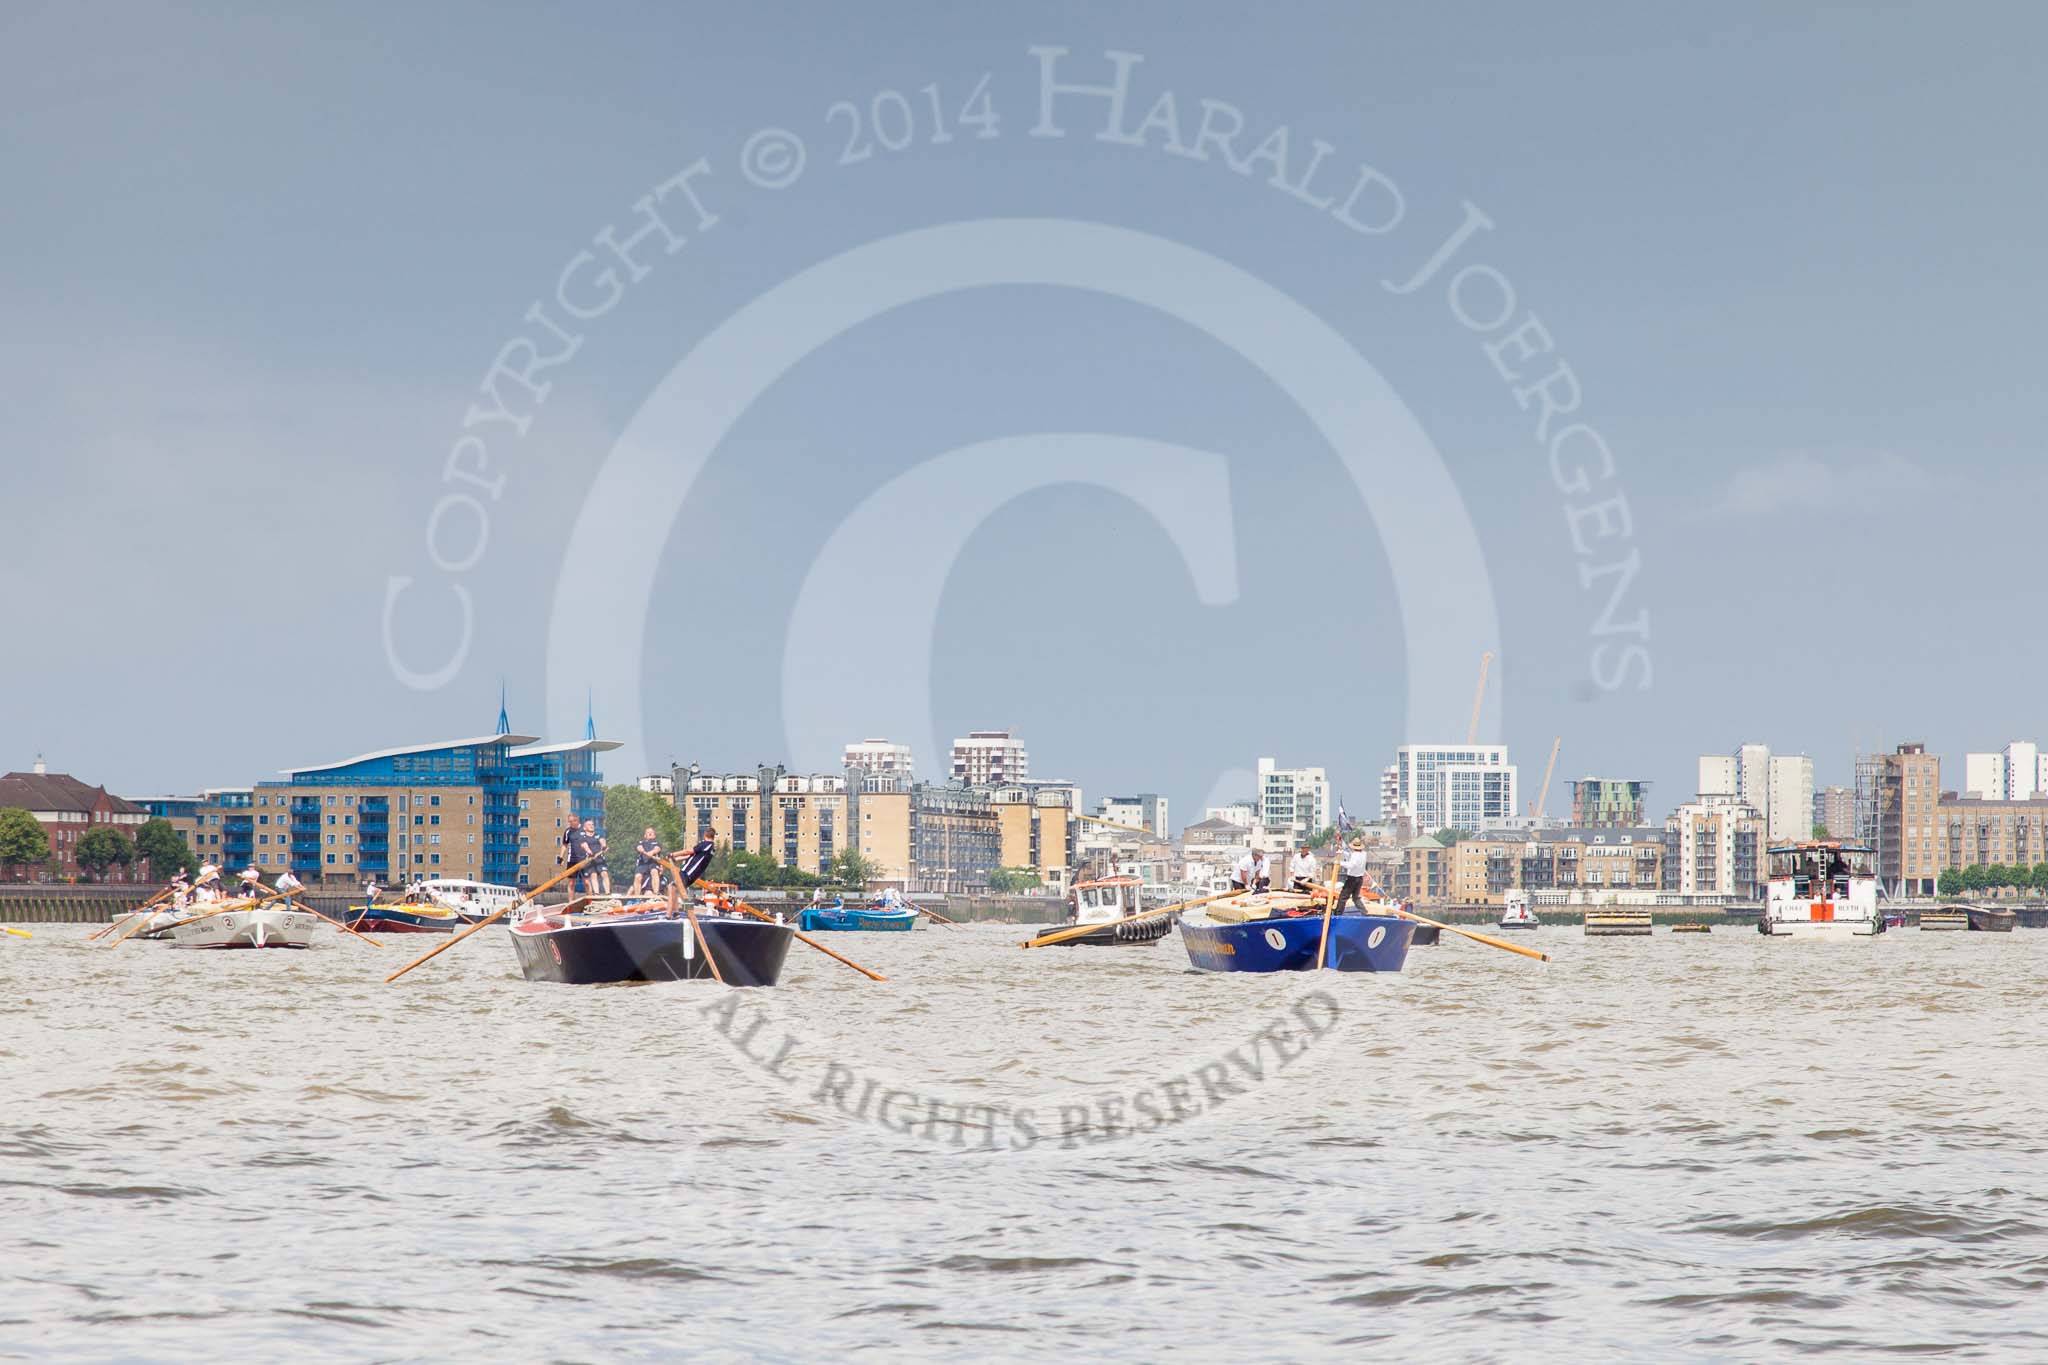 TOW River Thames Barge Driving Race 2014.
River Thames between Greenwich and Westminster,
London,

United Kingdom,
on 28 June 2014 at 12:37, image #106